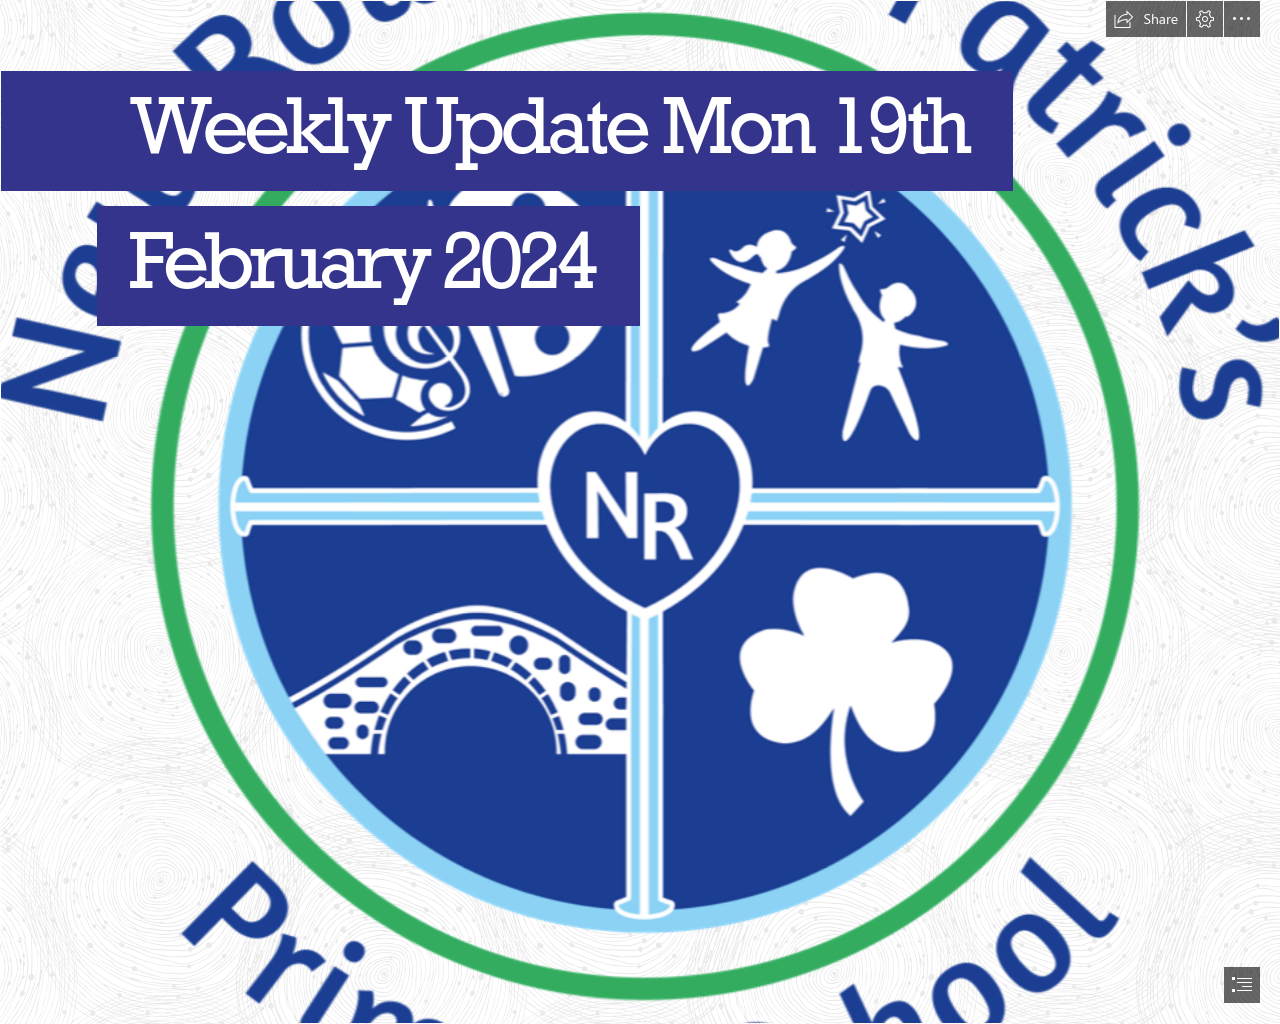 Weekly Update Monday 19th February 2024